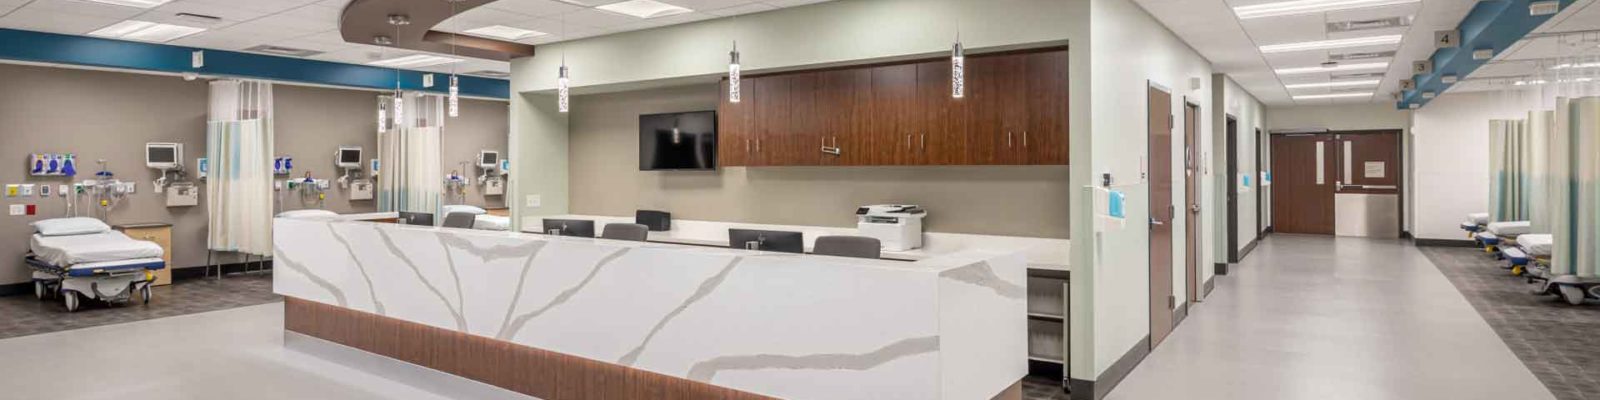 What to Consider When Building a Surgery Center